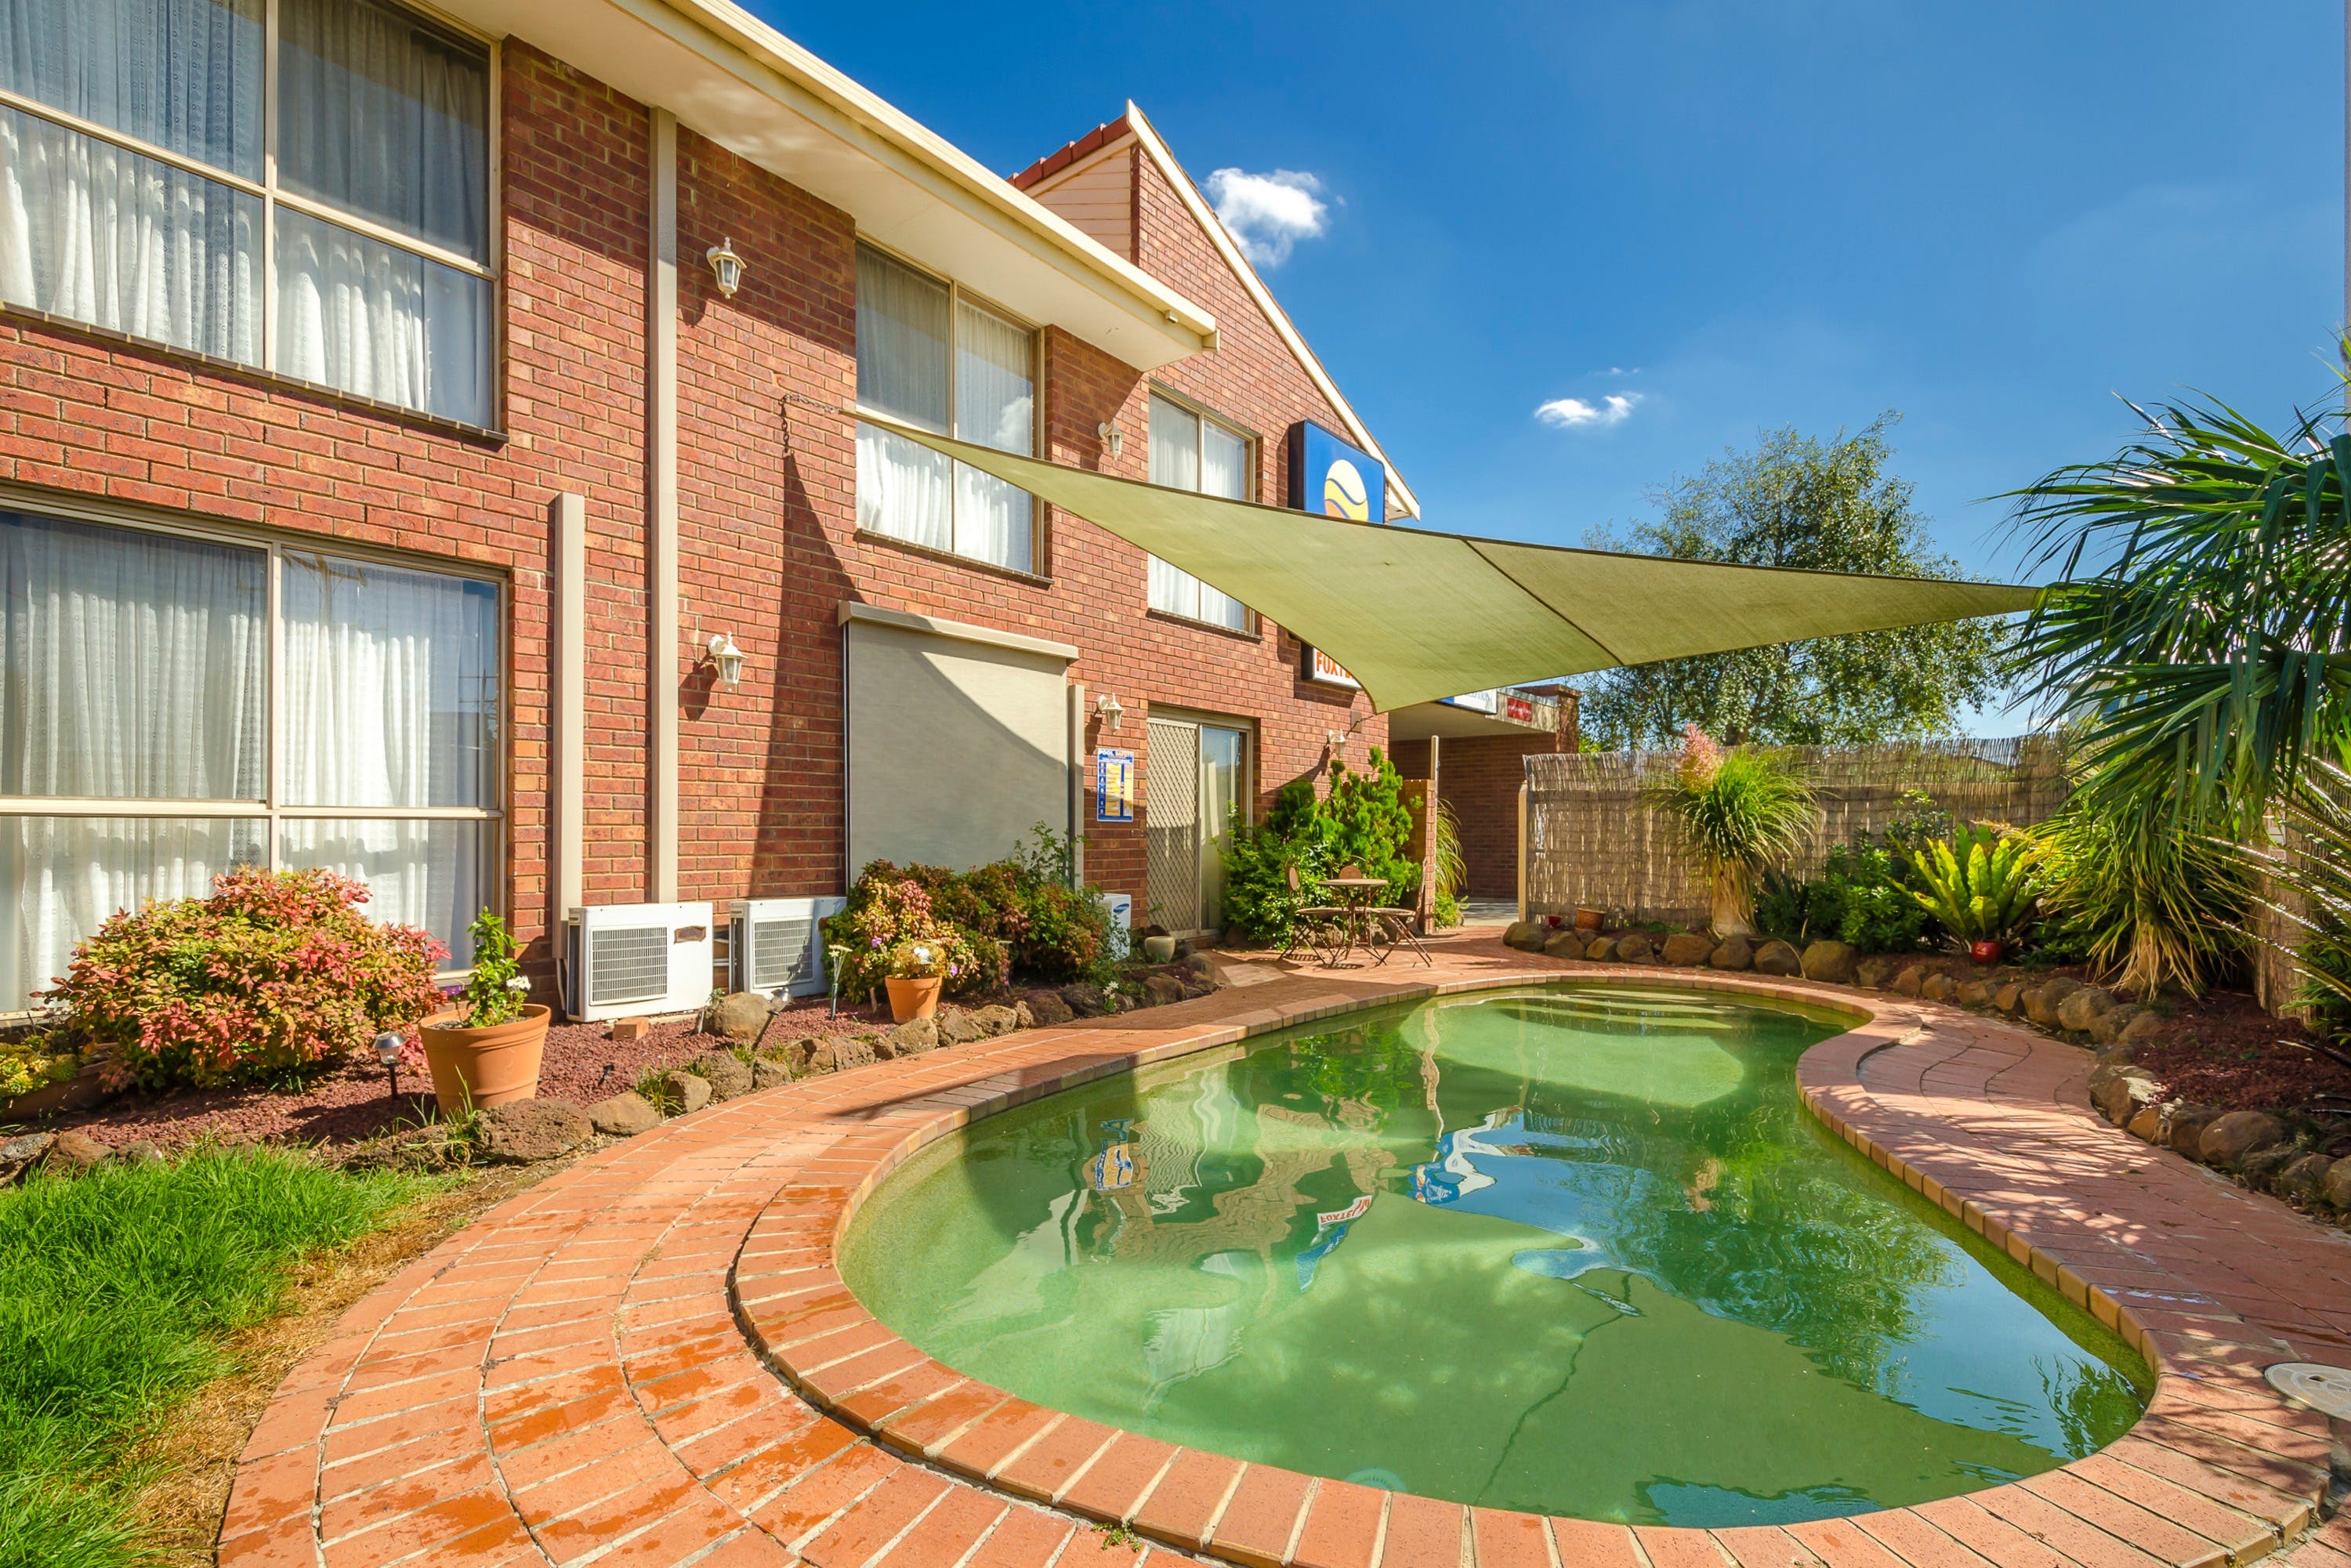 Werribee Motel  Apartments - Townsville Tourism